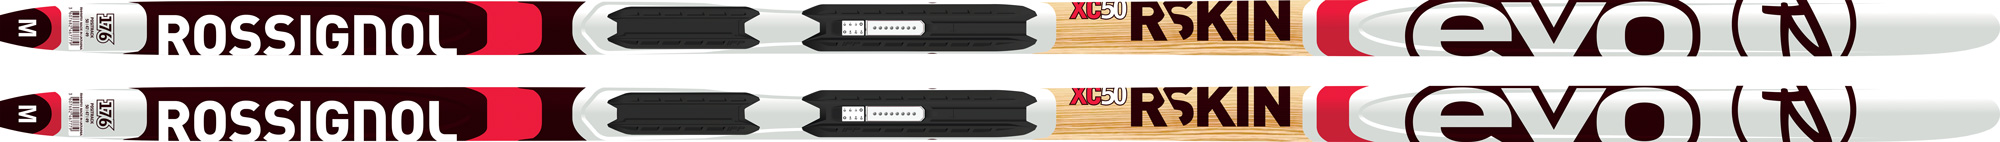 Cross-country skis for classic style